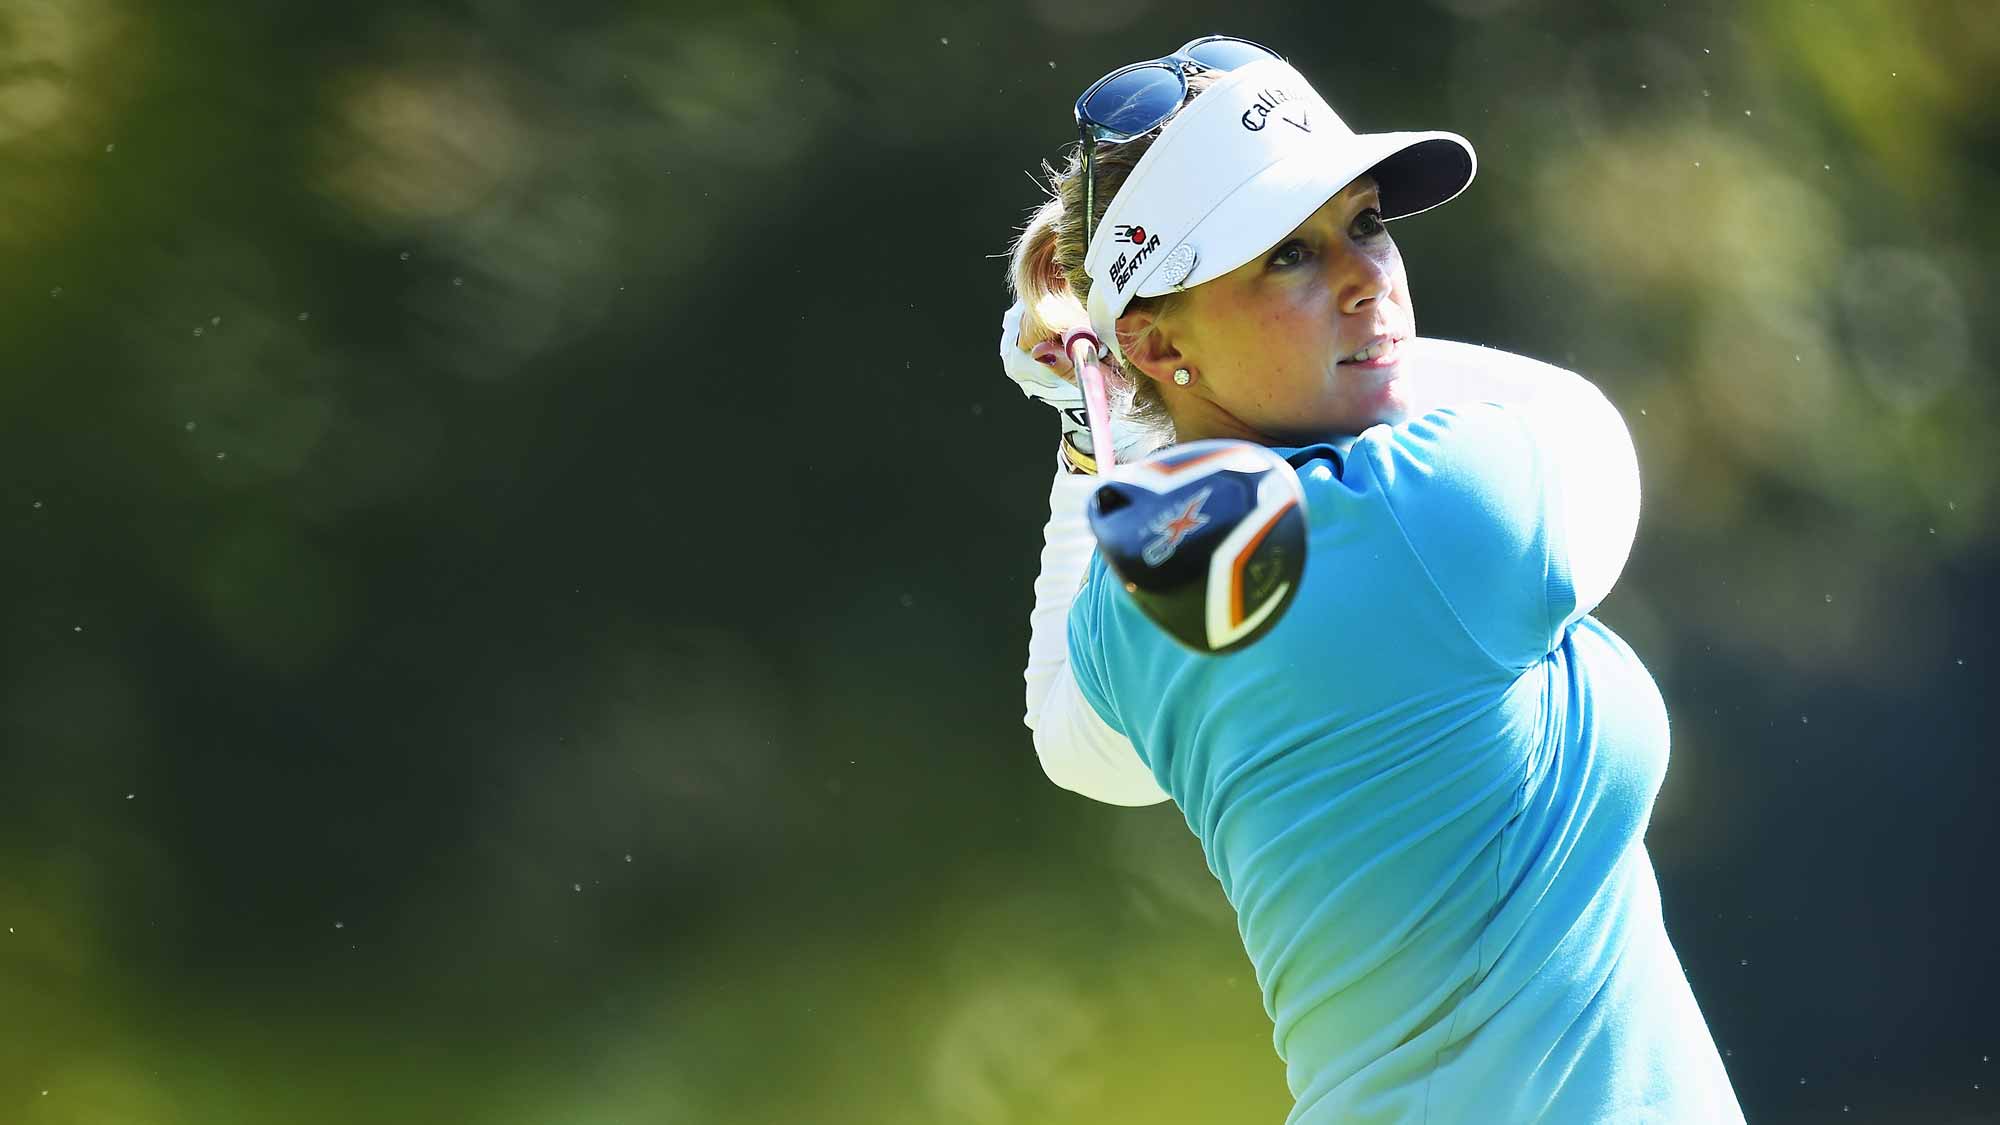 Morgan Pressel during the second round of the Evian Championship